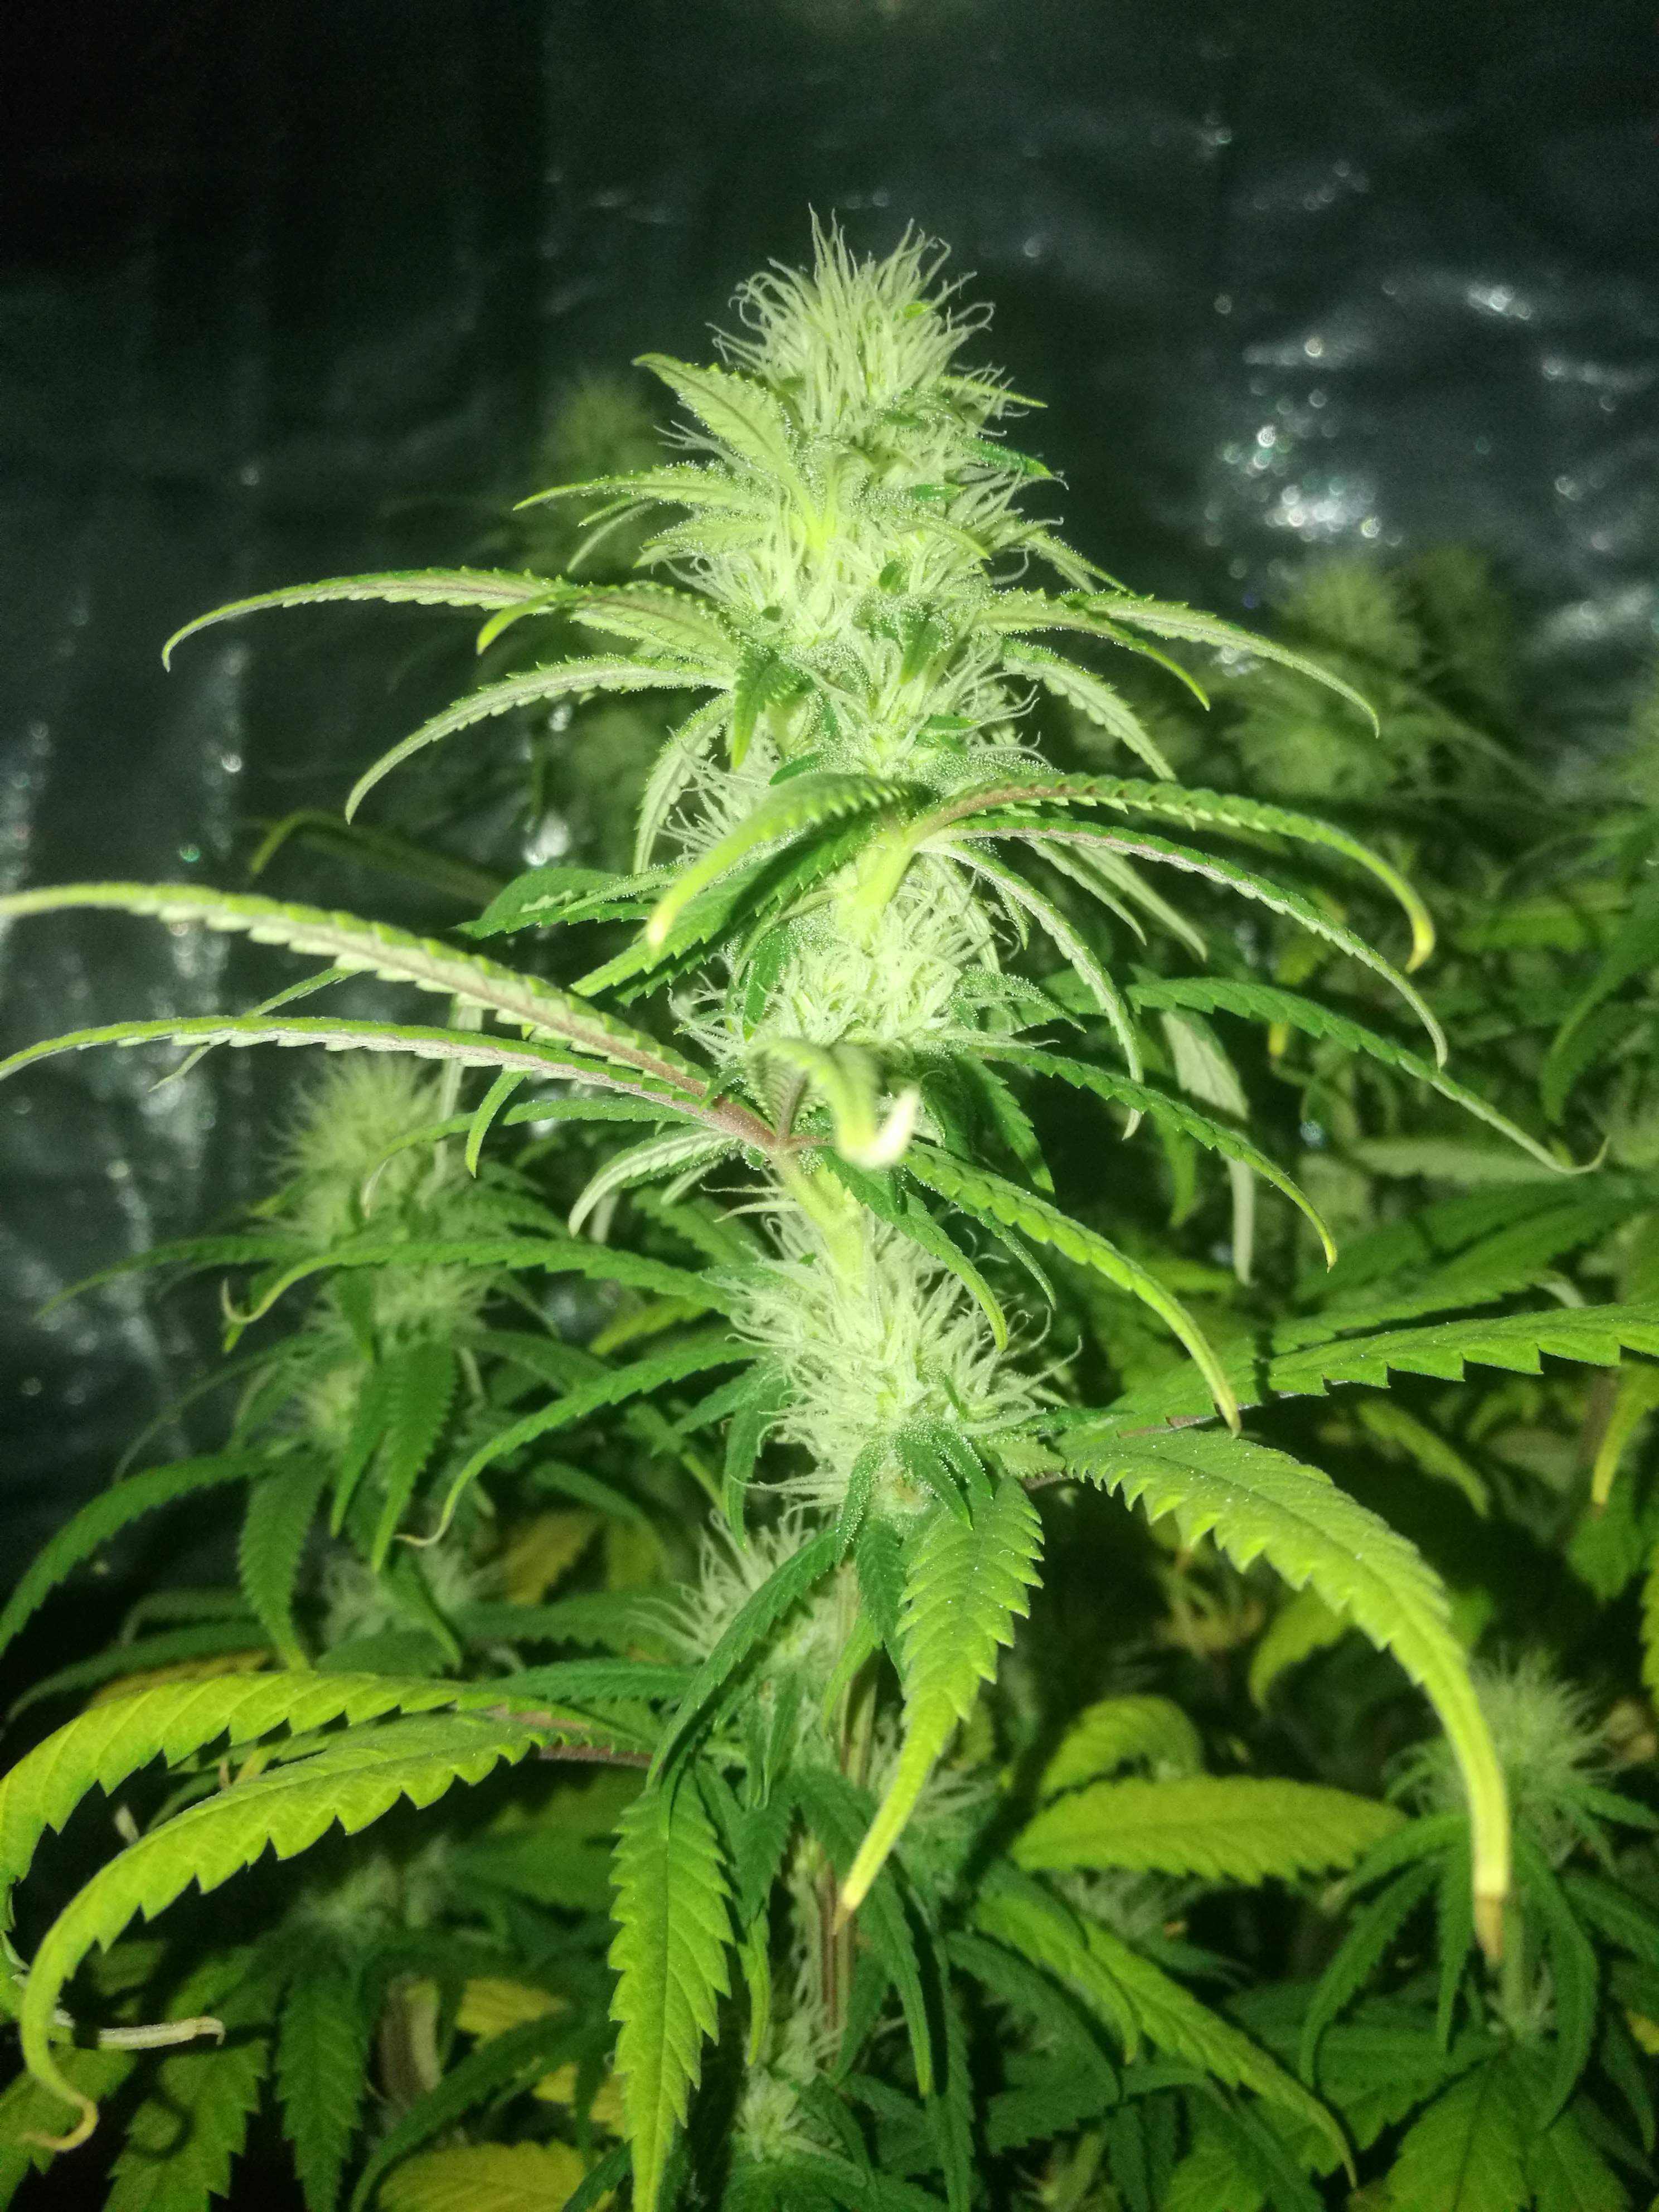 3rd week of flower biobizz nutrient and soil indoor runtz muffin barneys farm from uk seedbank pick and mix seeds